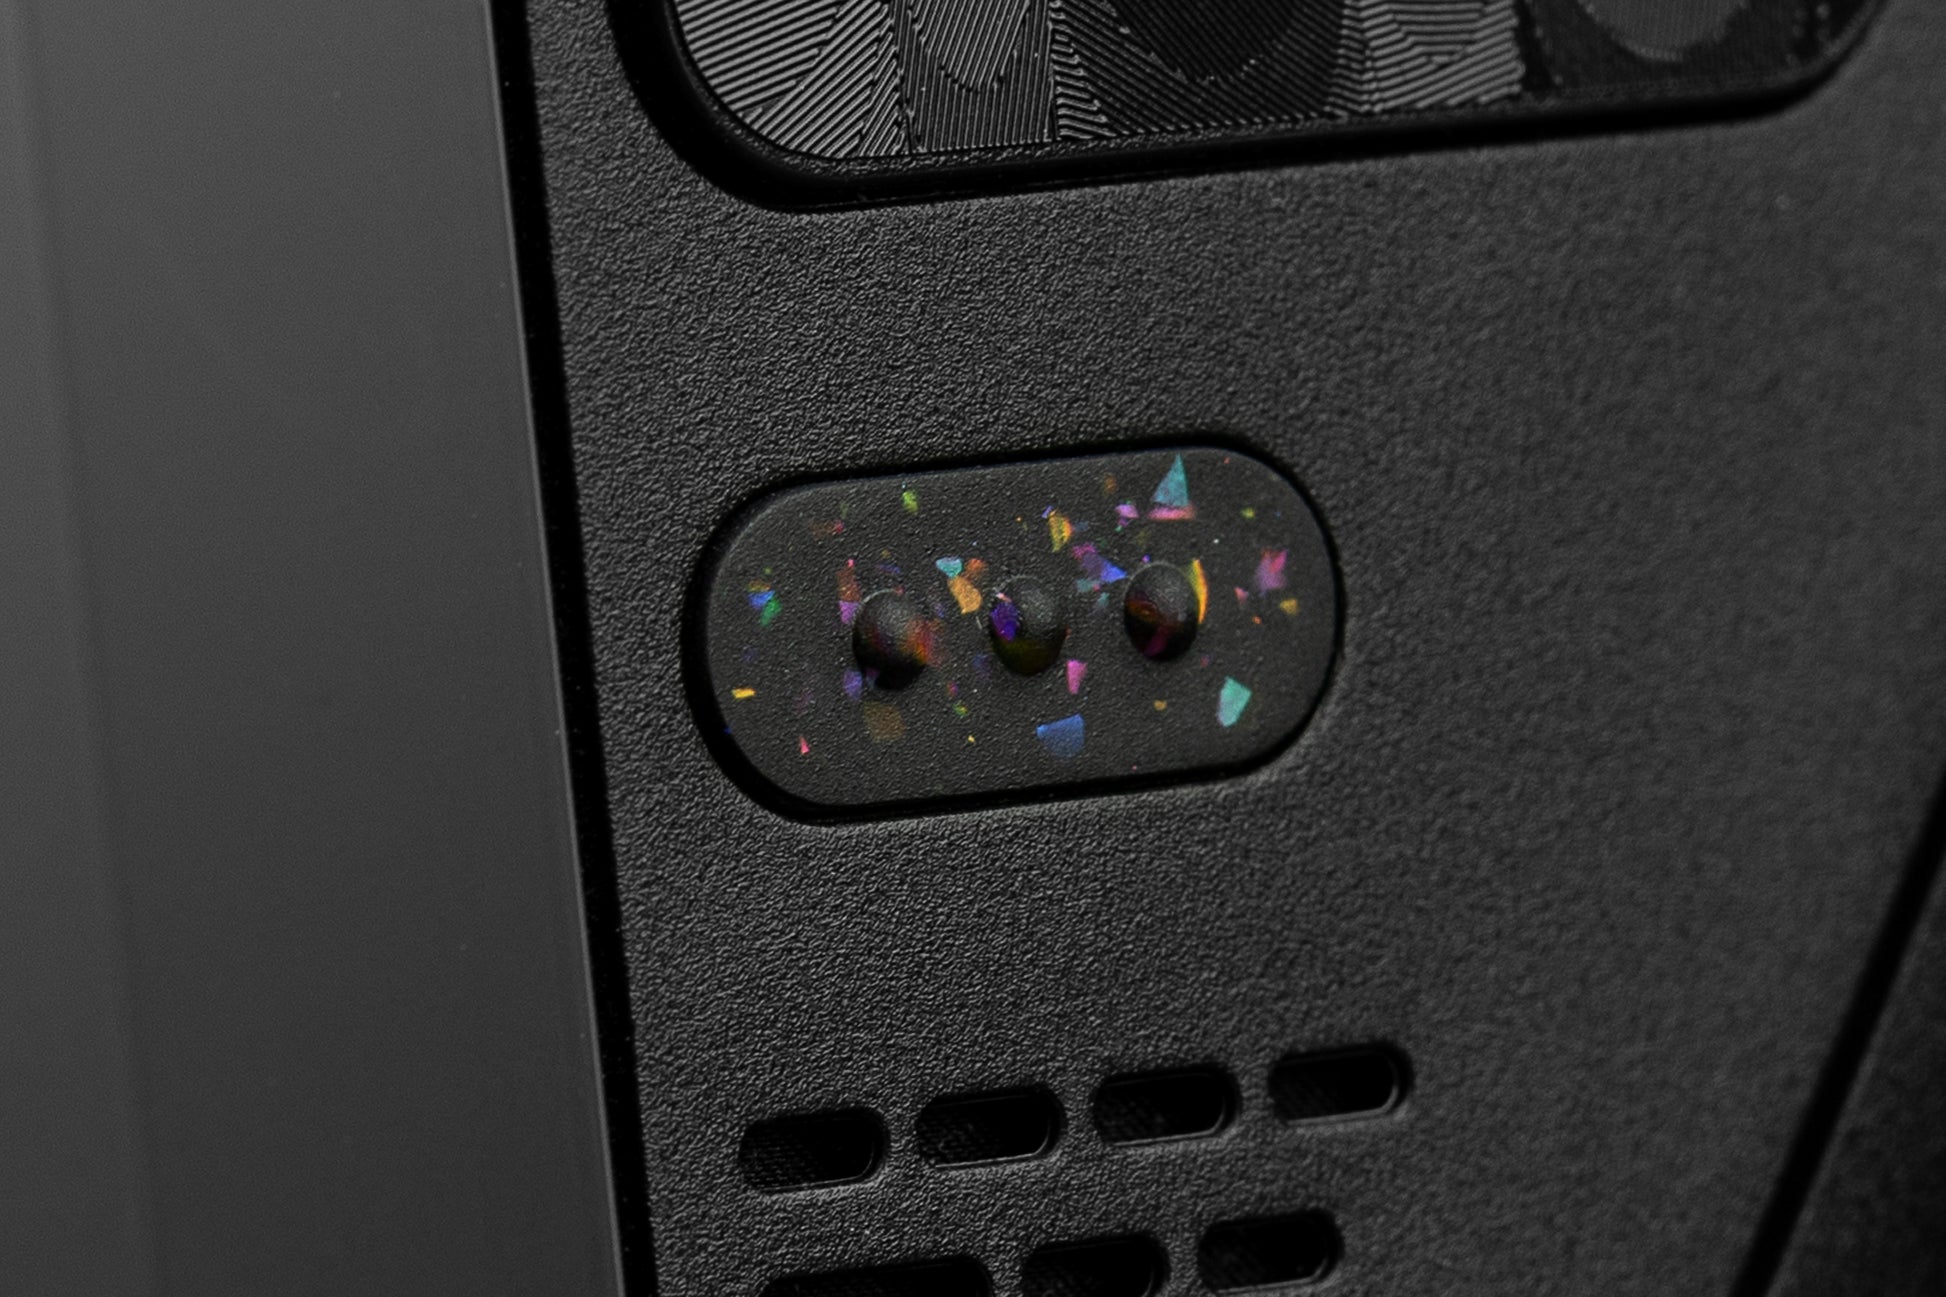 Cose up of "3 dots" button on steam deck in party black. Party black metallic shards of color mixed into black buttons. 